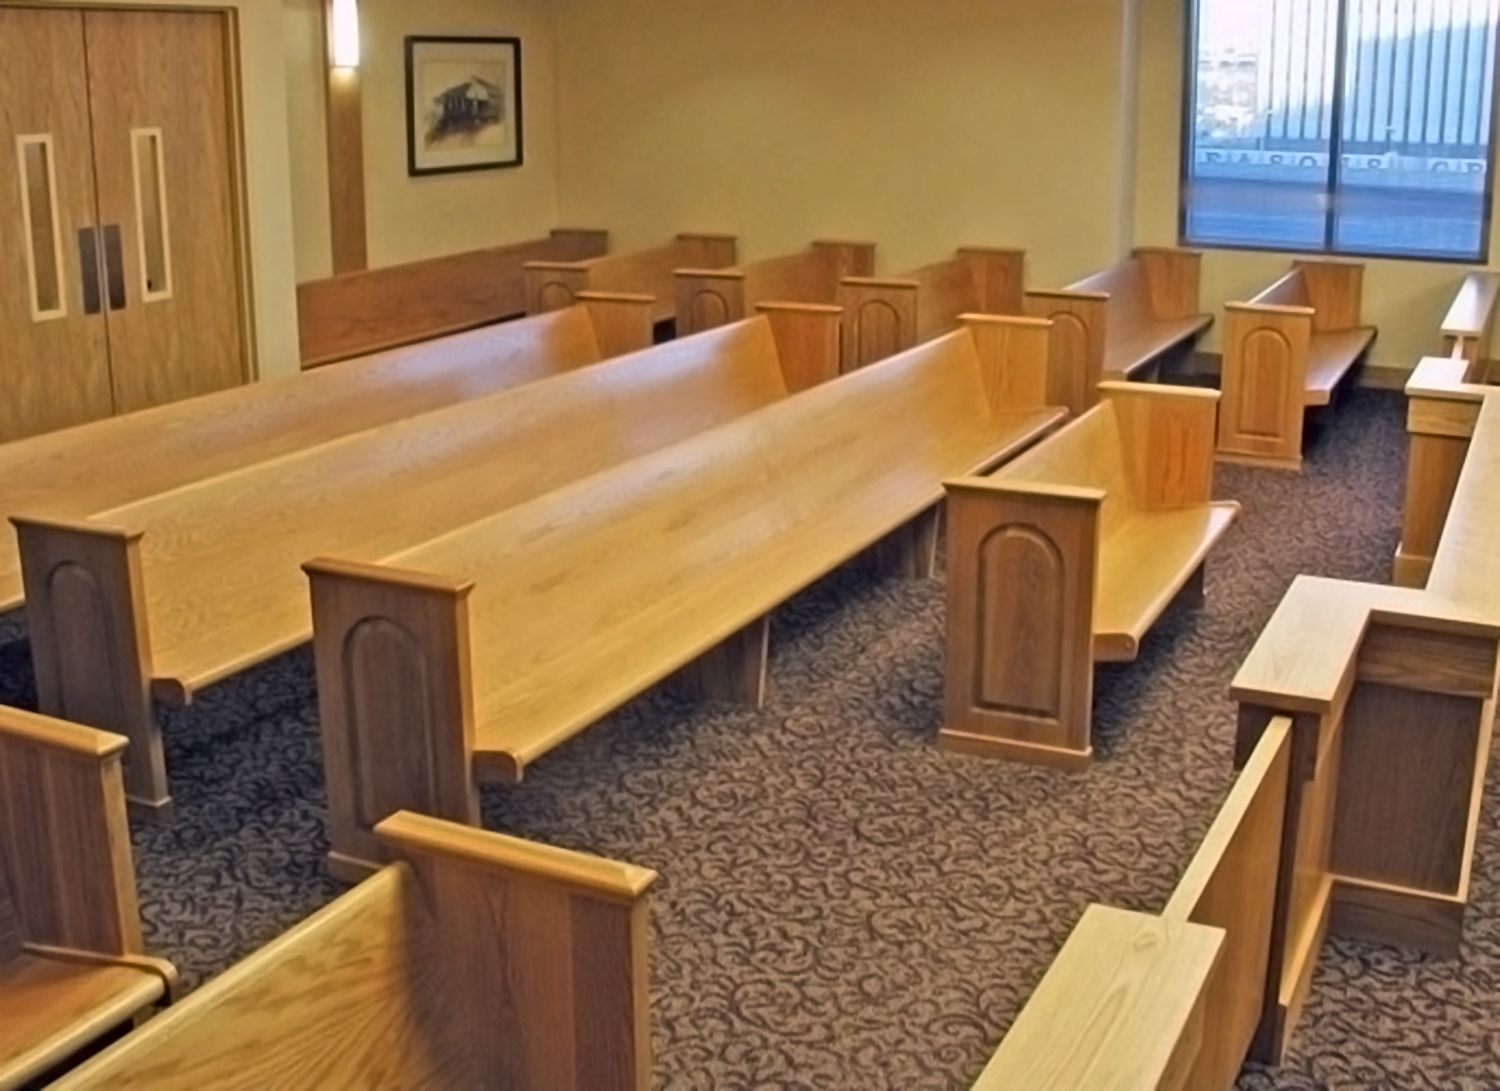 Straight Wood Benches in Bernallilo County Court - Albuquerque, NM